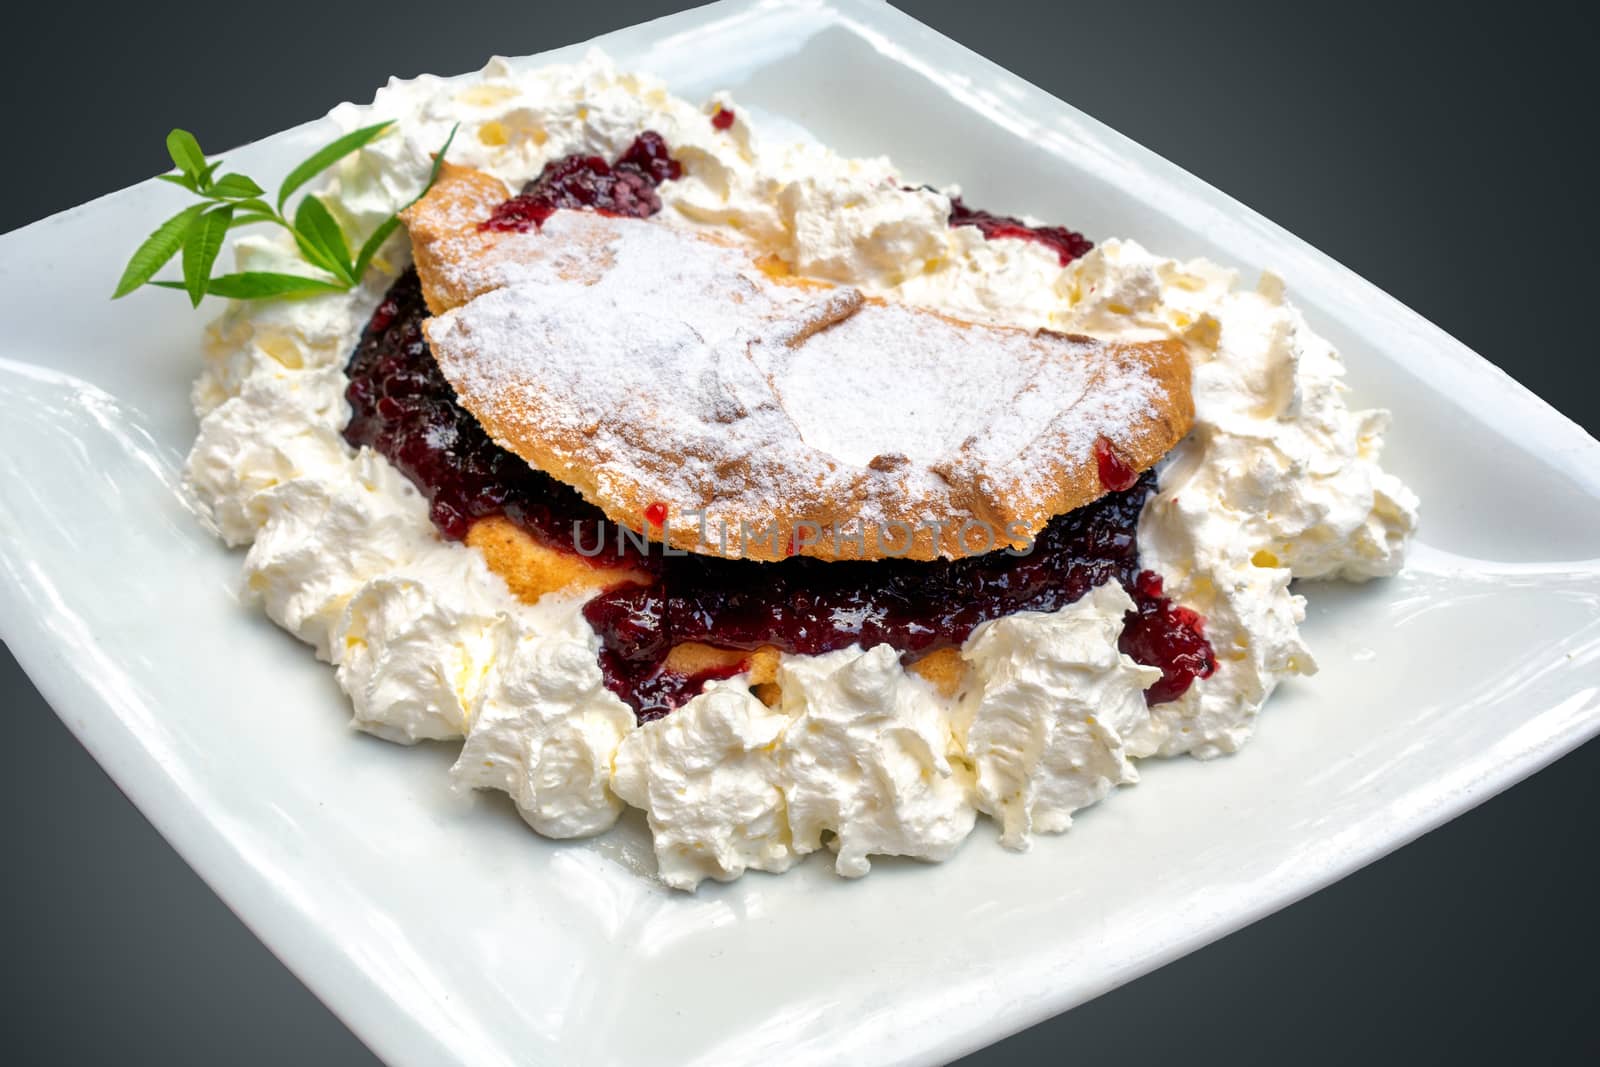 Fruit omelet with cranberry jam, powder sugar and whipped cream on white plate, with green herbs, isolated on grey background, traditional European dessert known as Pohorska omleta, Pohorje omelette